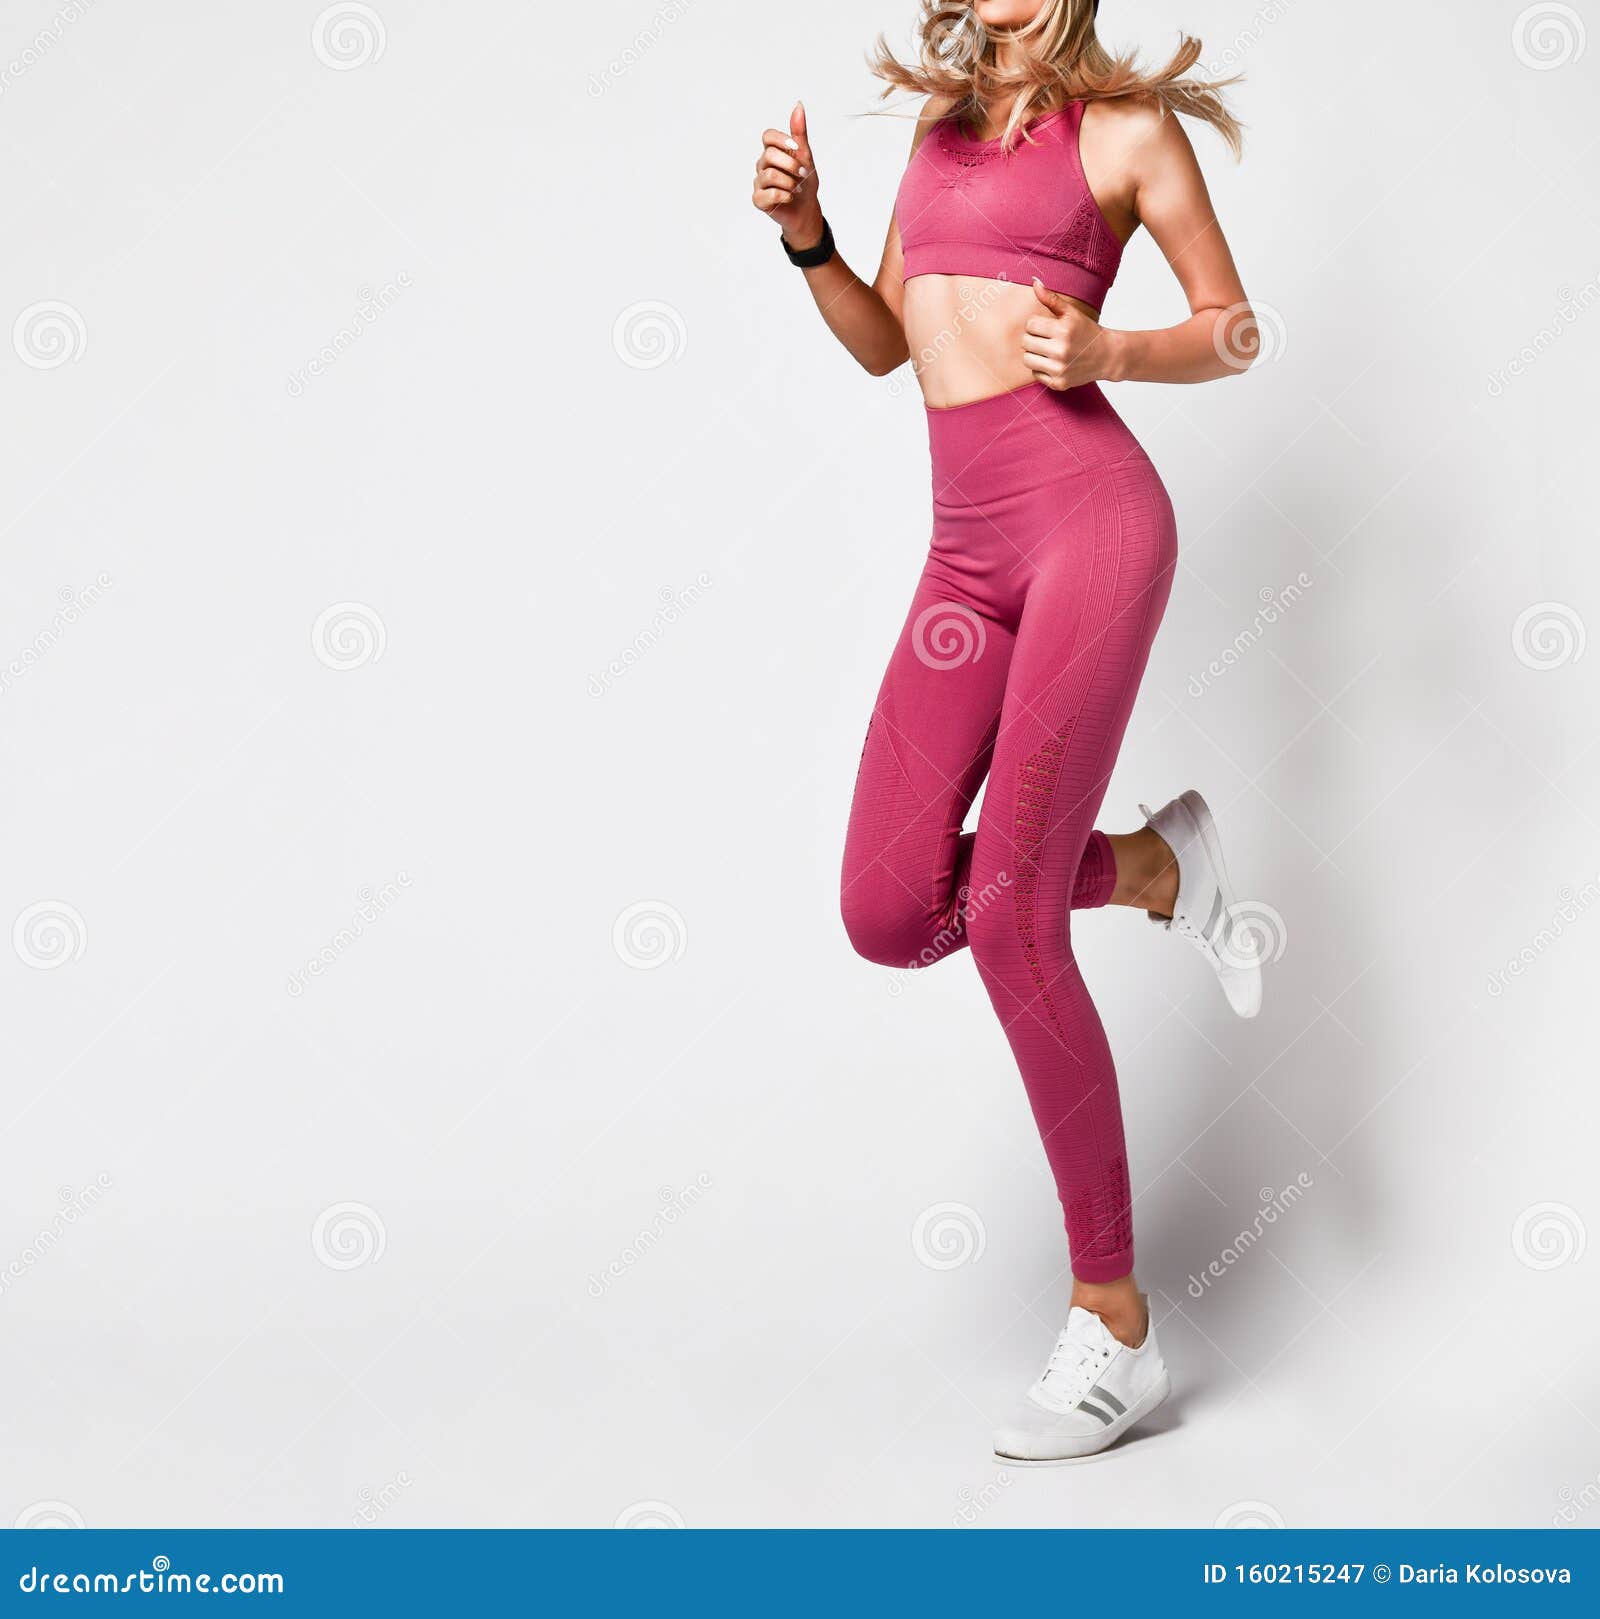 Blonde Woman with Perfect Athletic Slim Figure by Physical Education or  Fitness, Leads a Healthy Lifestyle, Wears Comfortable Stock Image - Image  of girl, exercising: 160215247